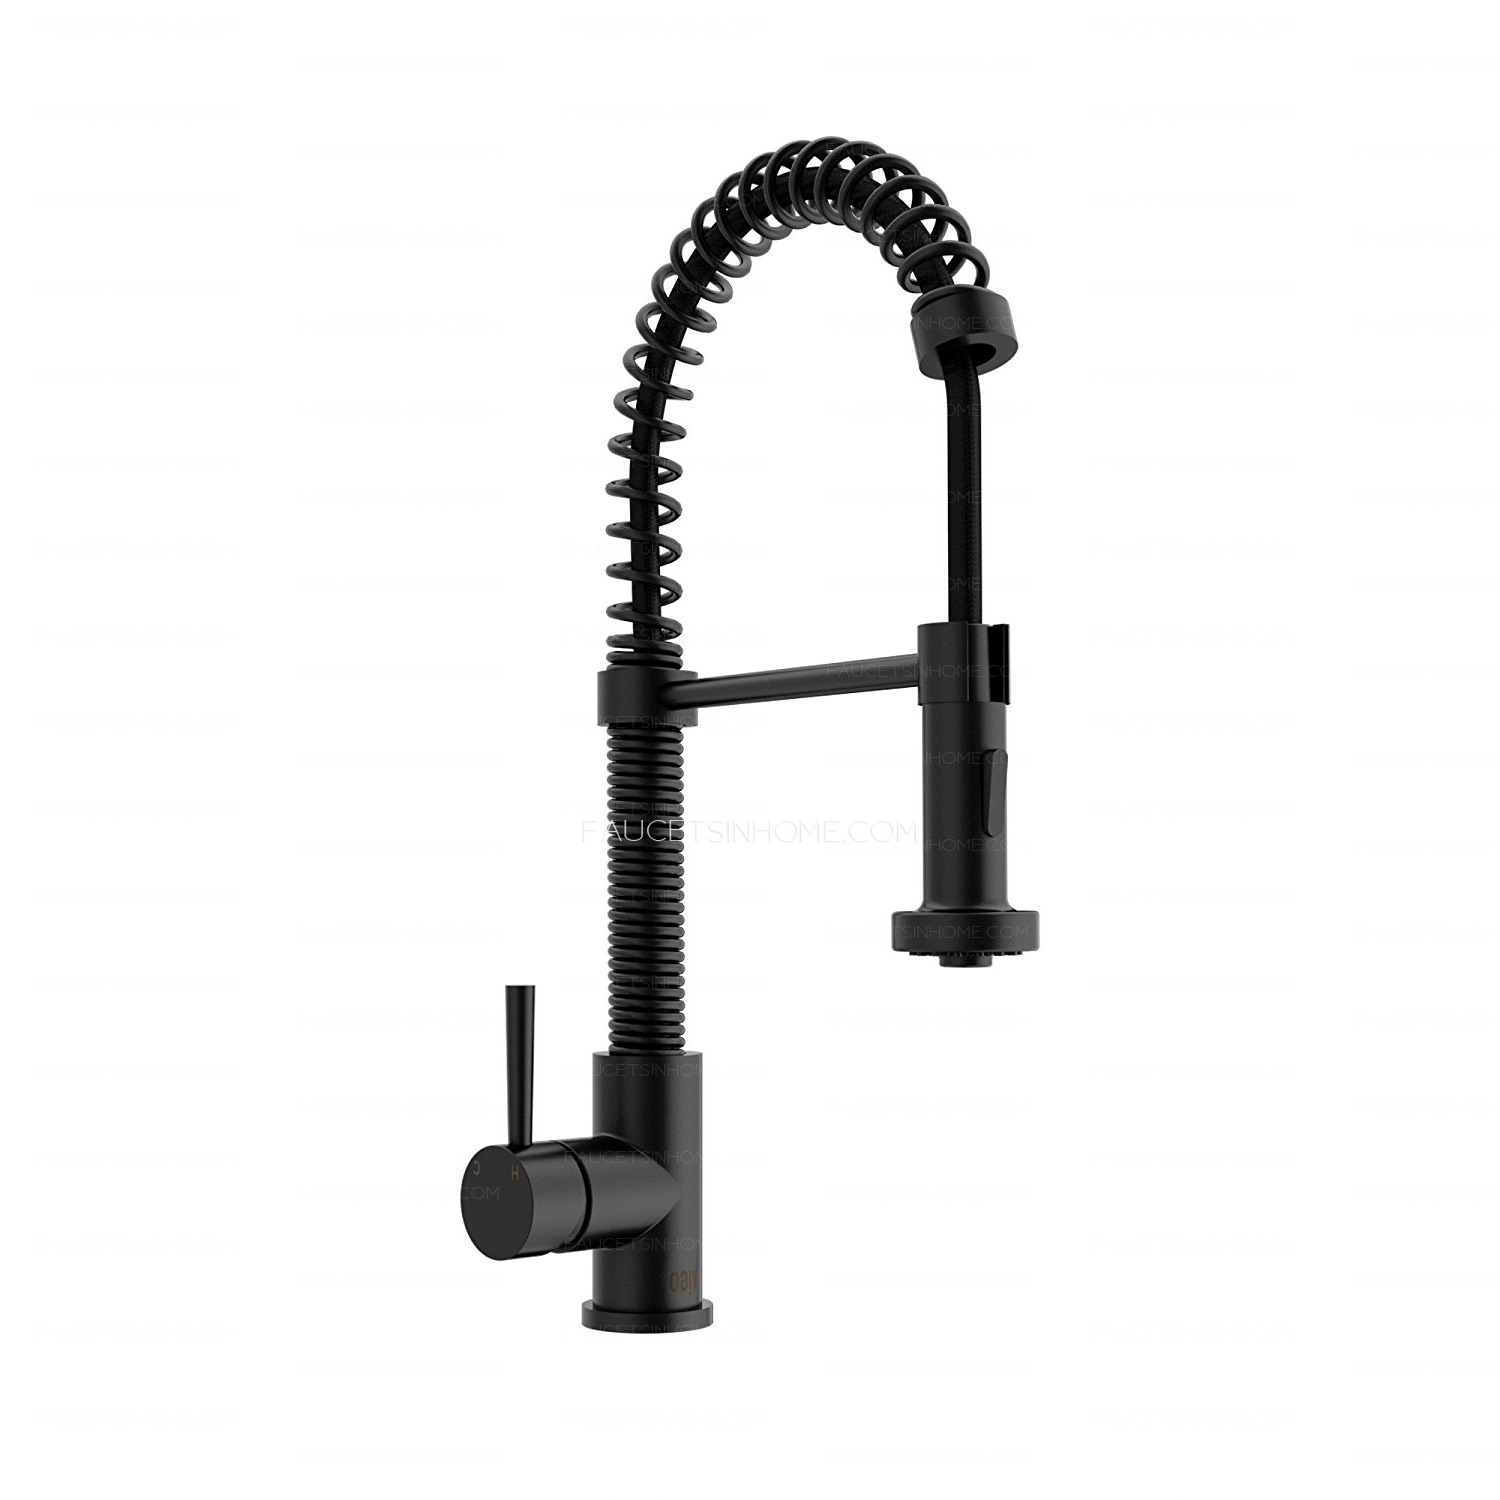 Matte Black Oil Rubbed Bronze Spring Kitchen Sink Faucet With Sprayer